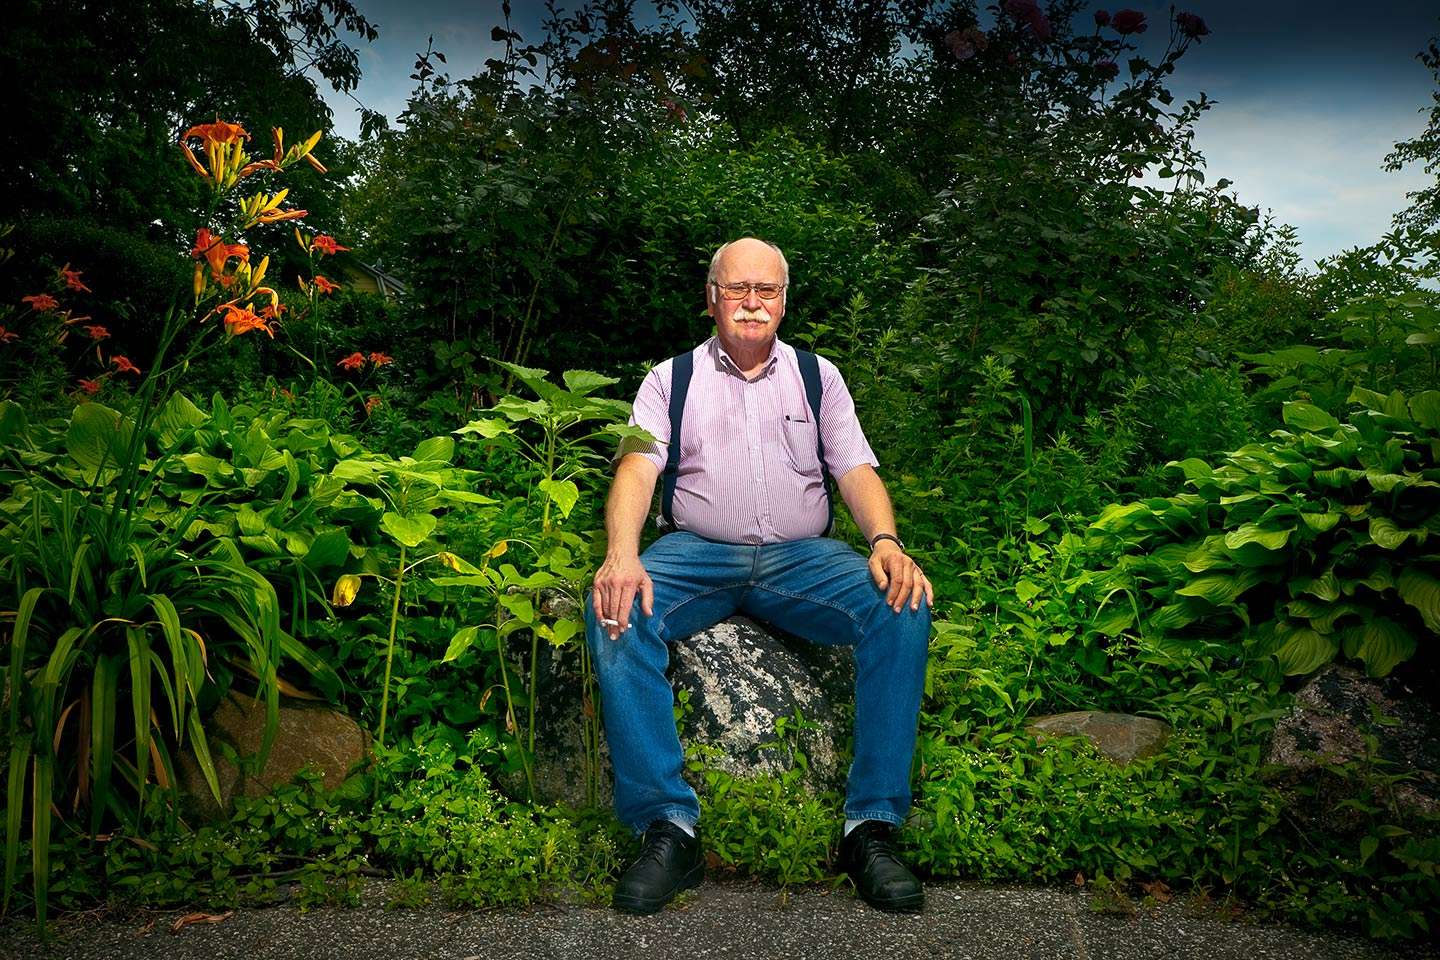 Organic farming in the Bronx.  Bissel Gardens is 5 city blocks converted into organic farming feeding individuals, low income, and homeless shelters.  Russ Lecount is one  of the founders and organizers. : Portraits : New York City portrait photographer